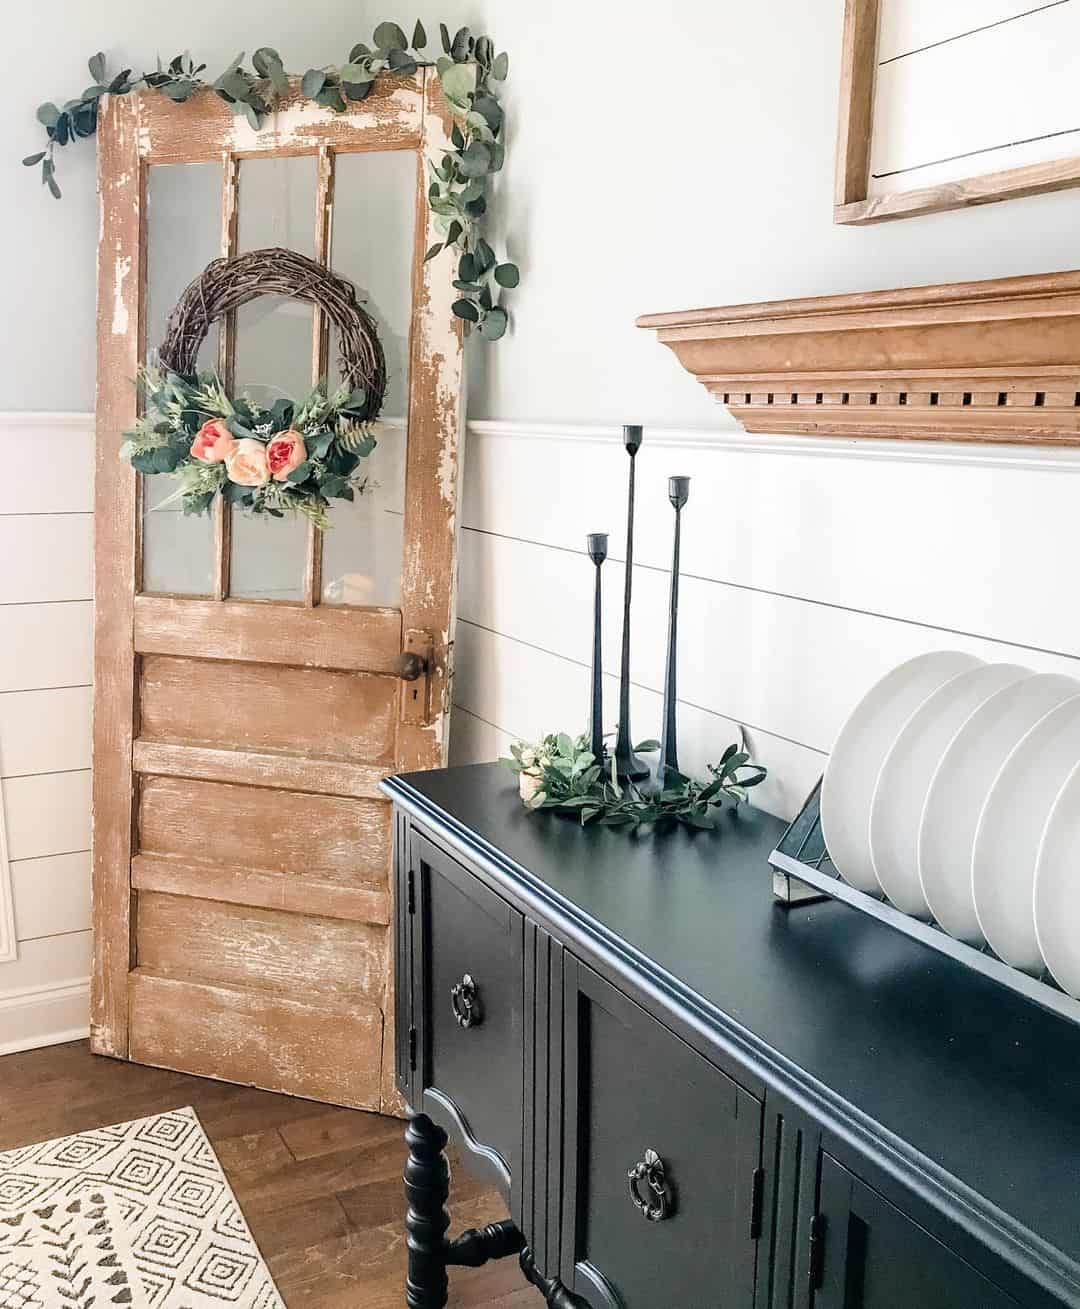 30 Wreaths for Christmas That Embody Farmhouse Holiday Style